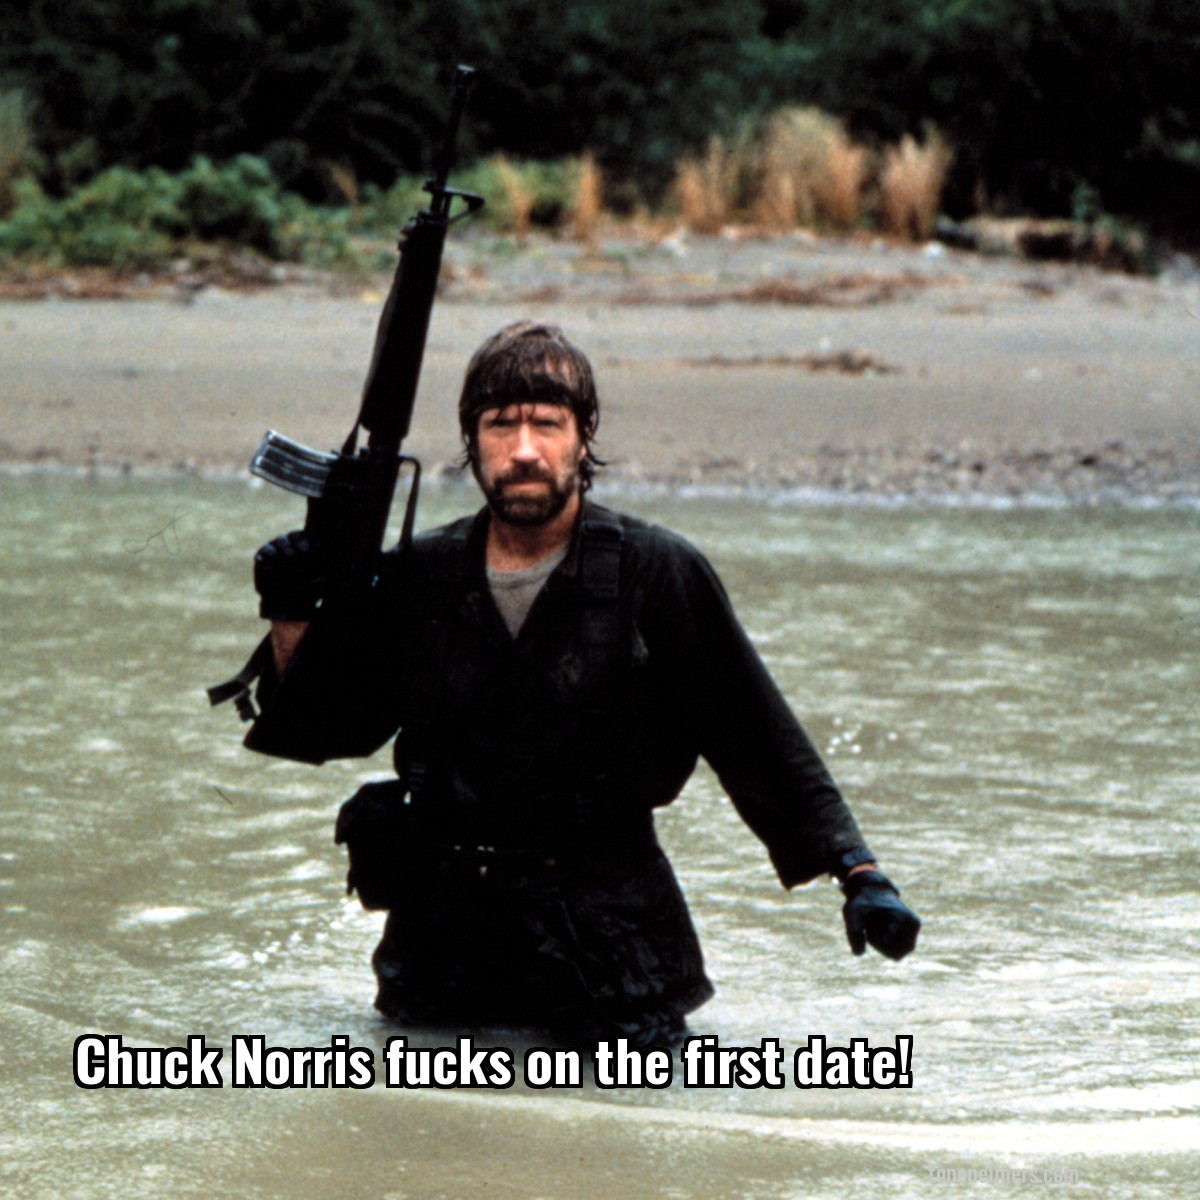 Chuck Norris fucks on the first date!